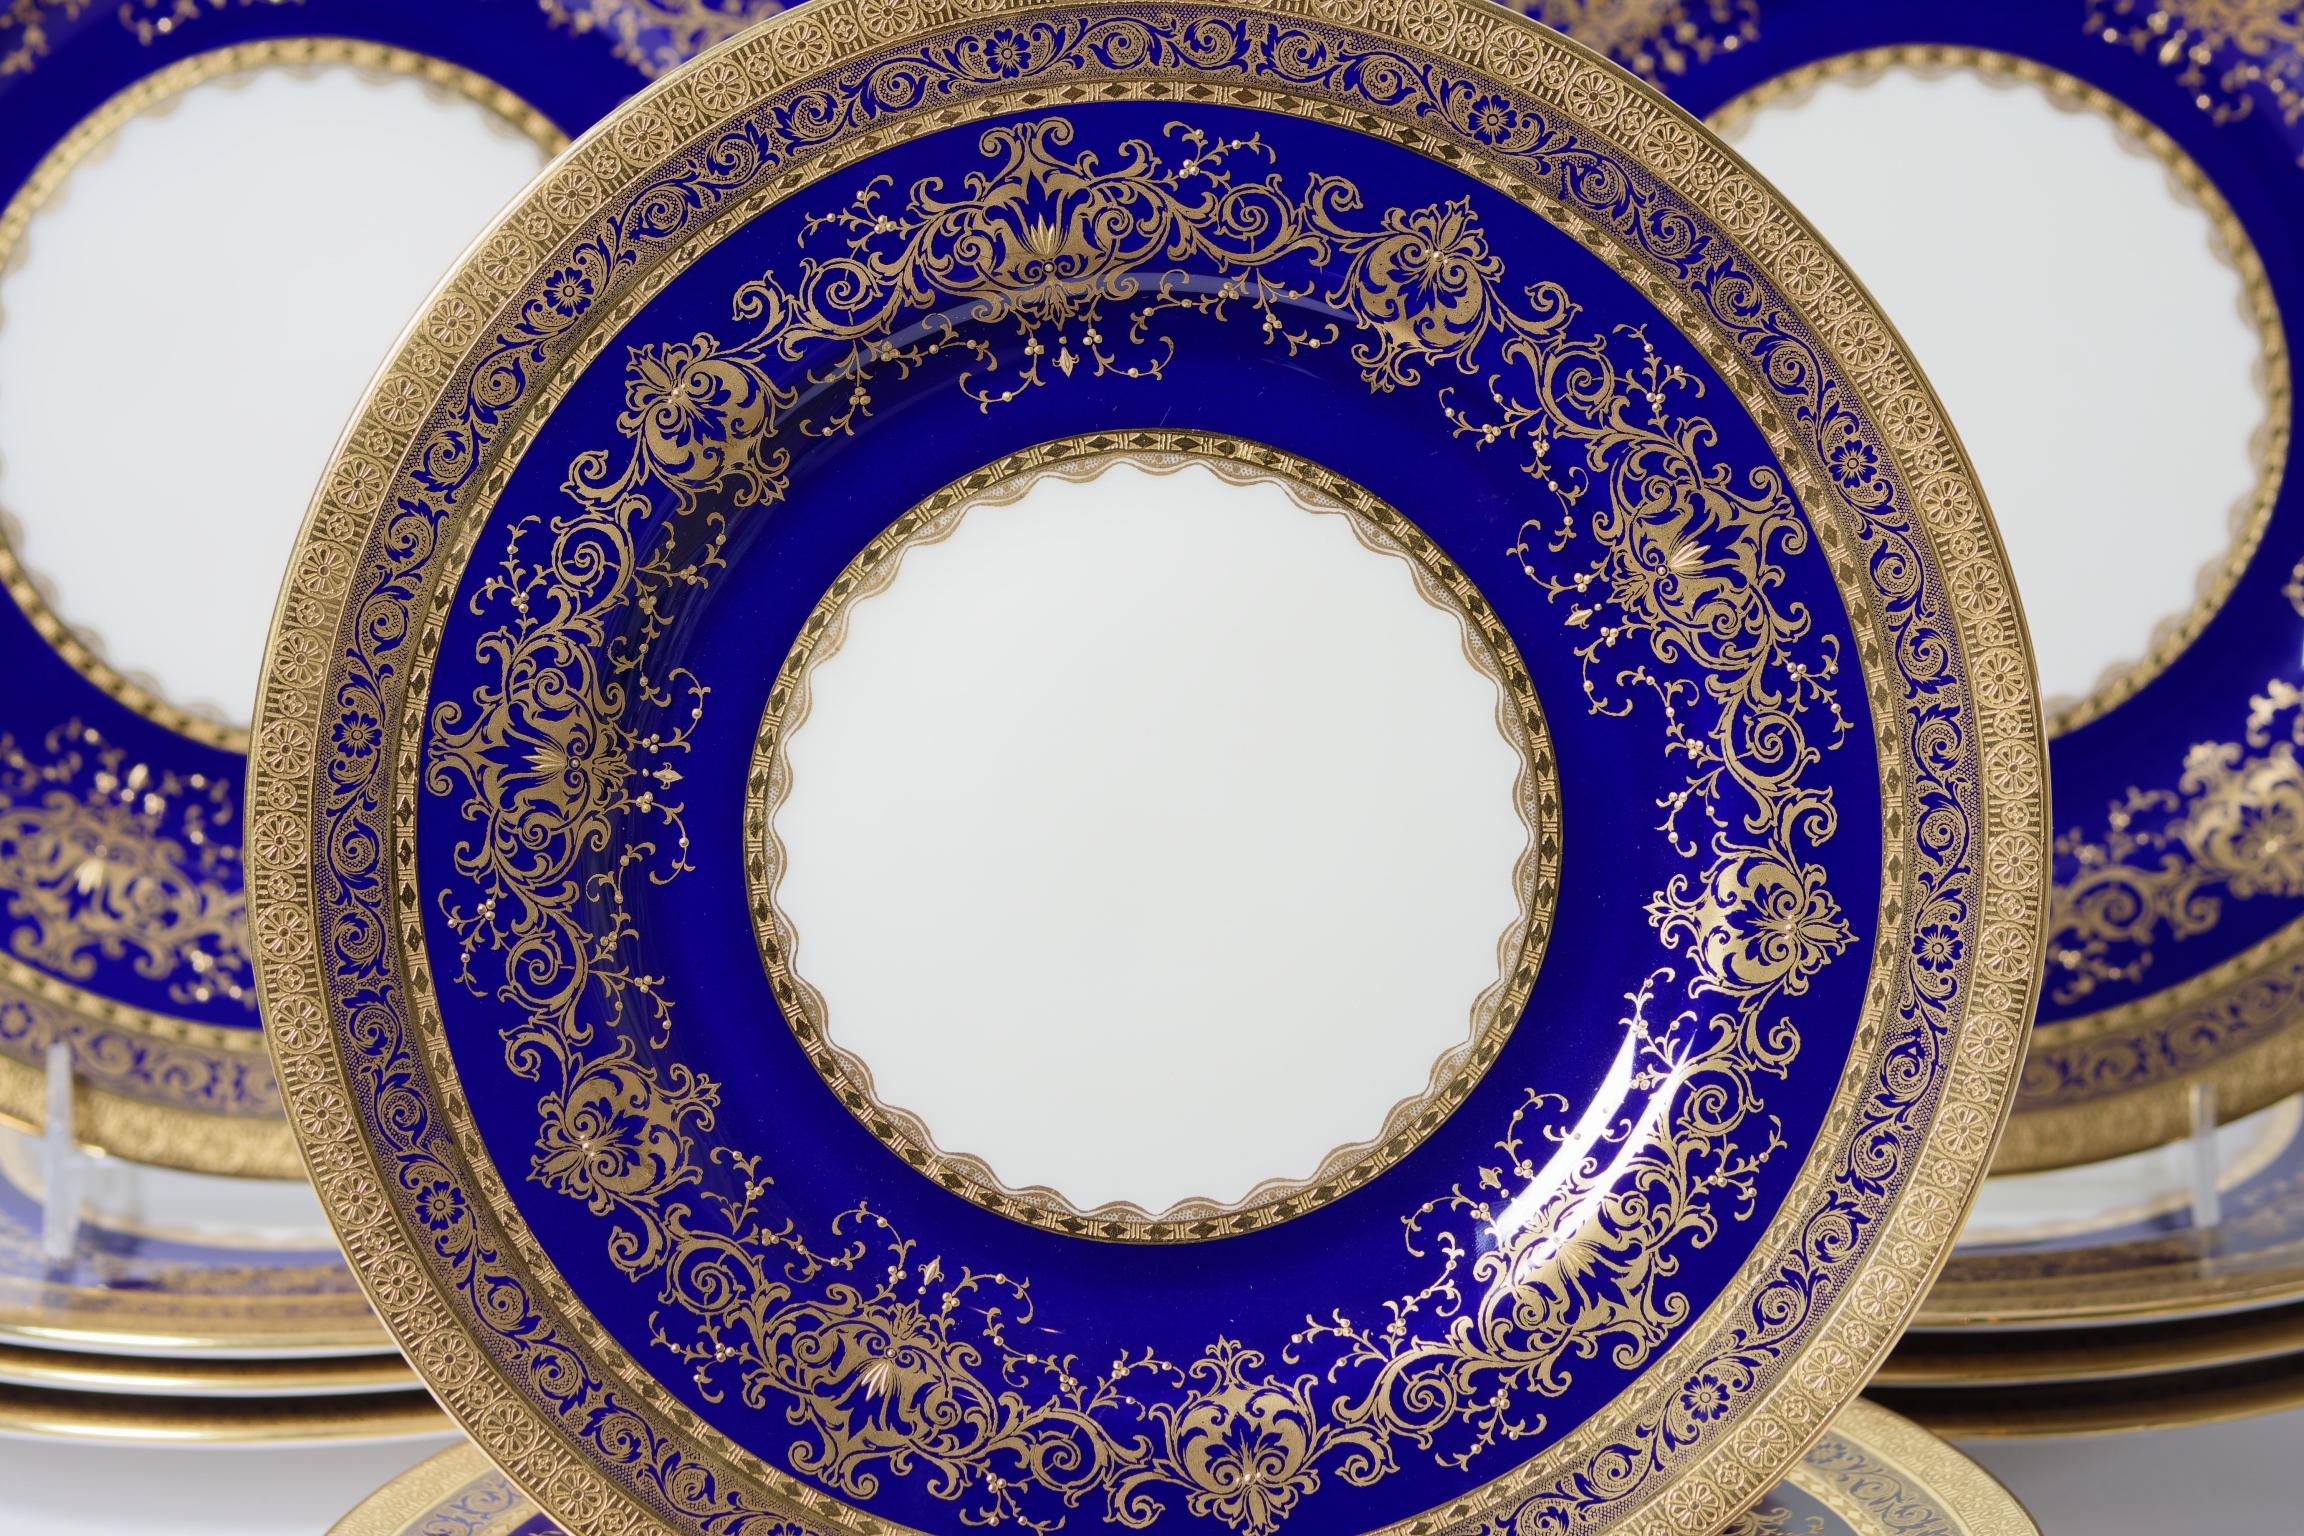 An impressive set of 12 dinner or presentation plates by one of the Gilded Age's re known factories: Minton England. This set was custom ordered through the storied New York retailer of Rich & Fisher Fifth Ave at the turn of the last century.